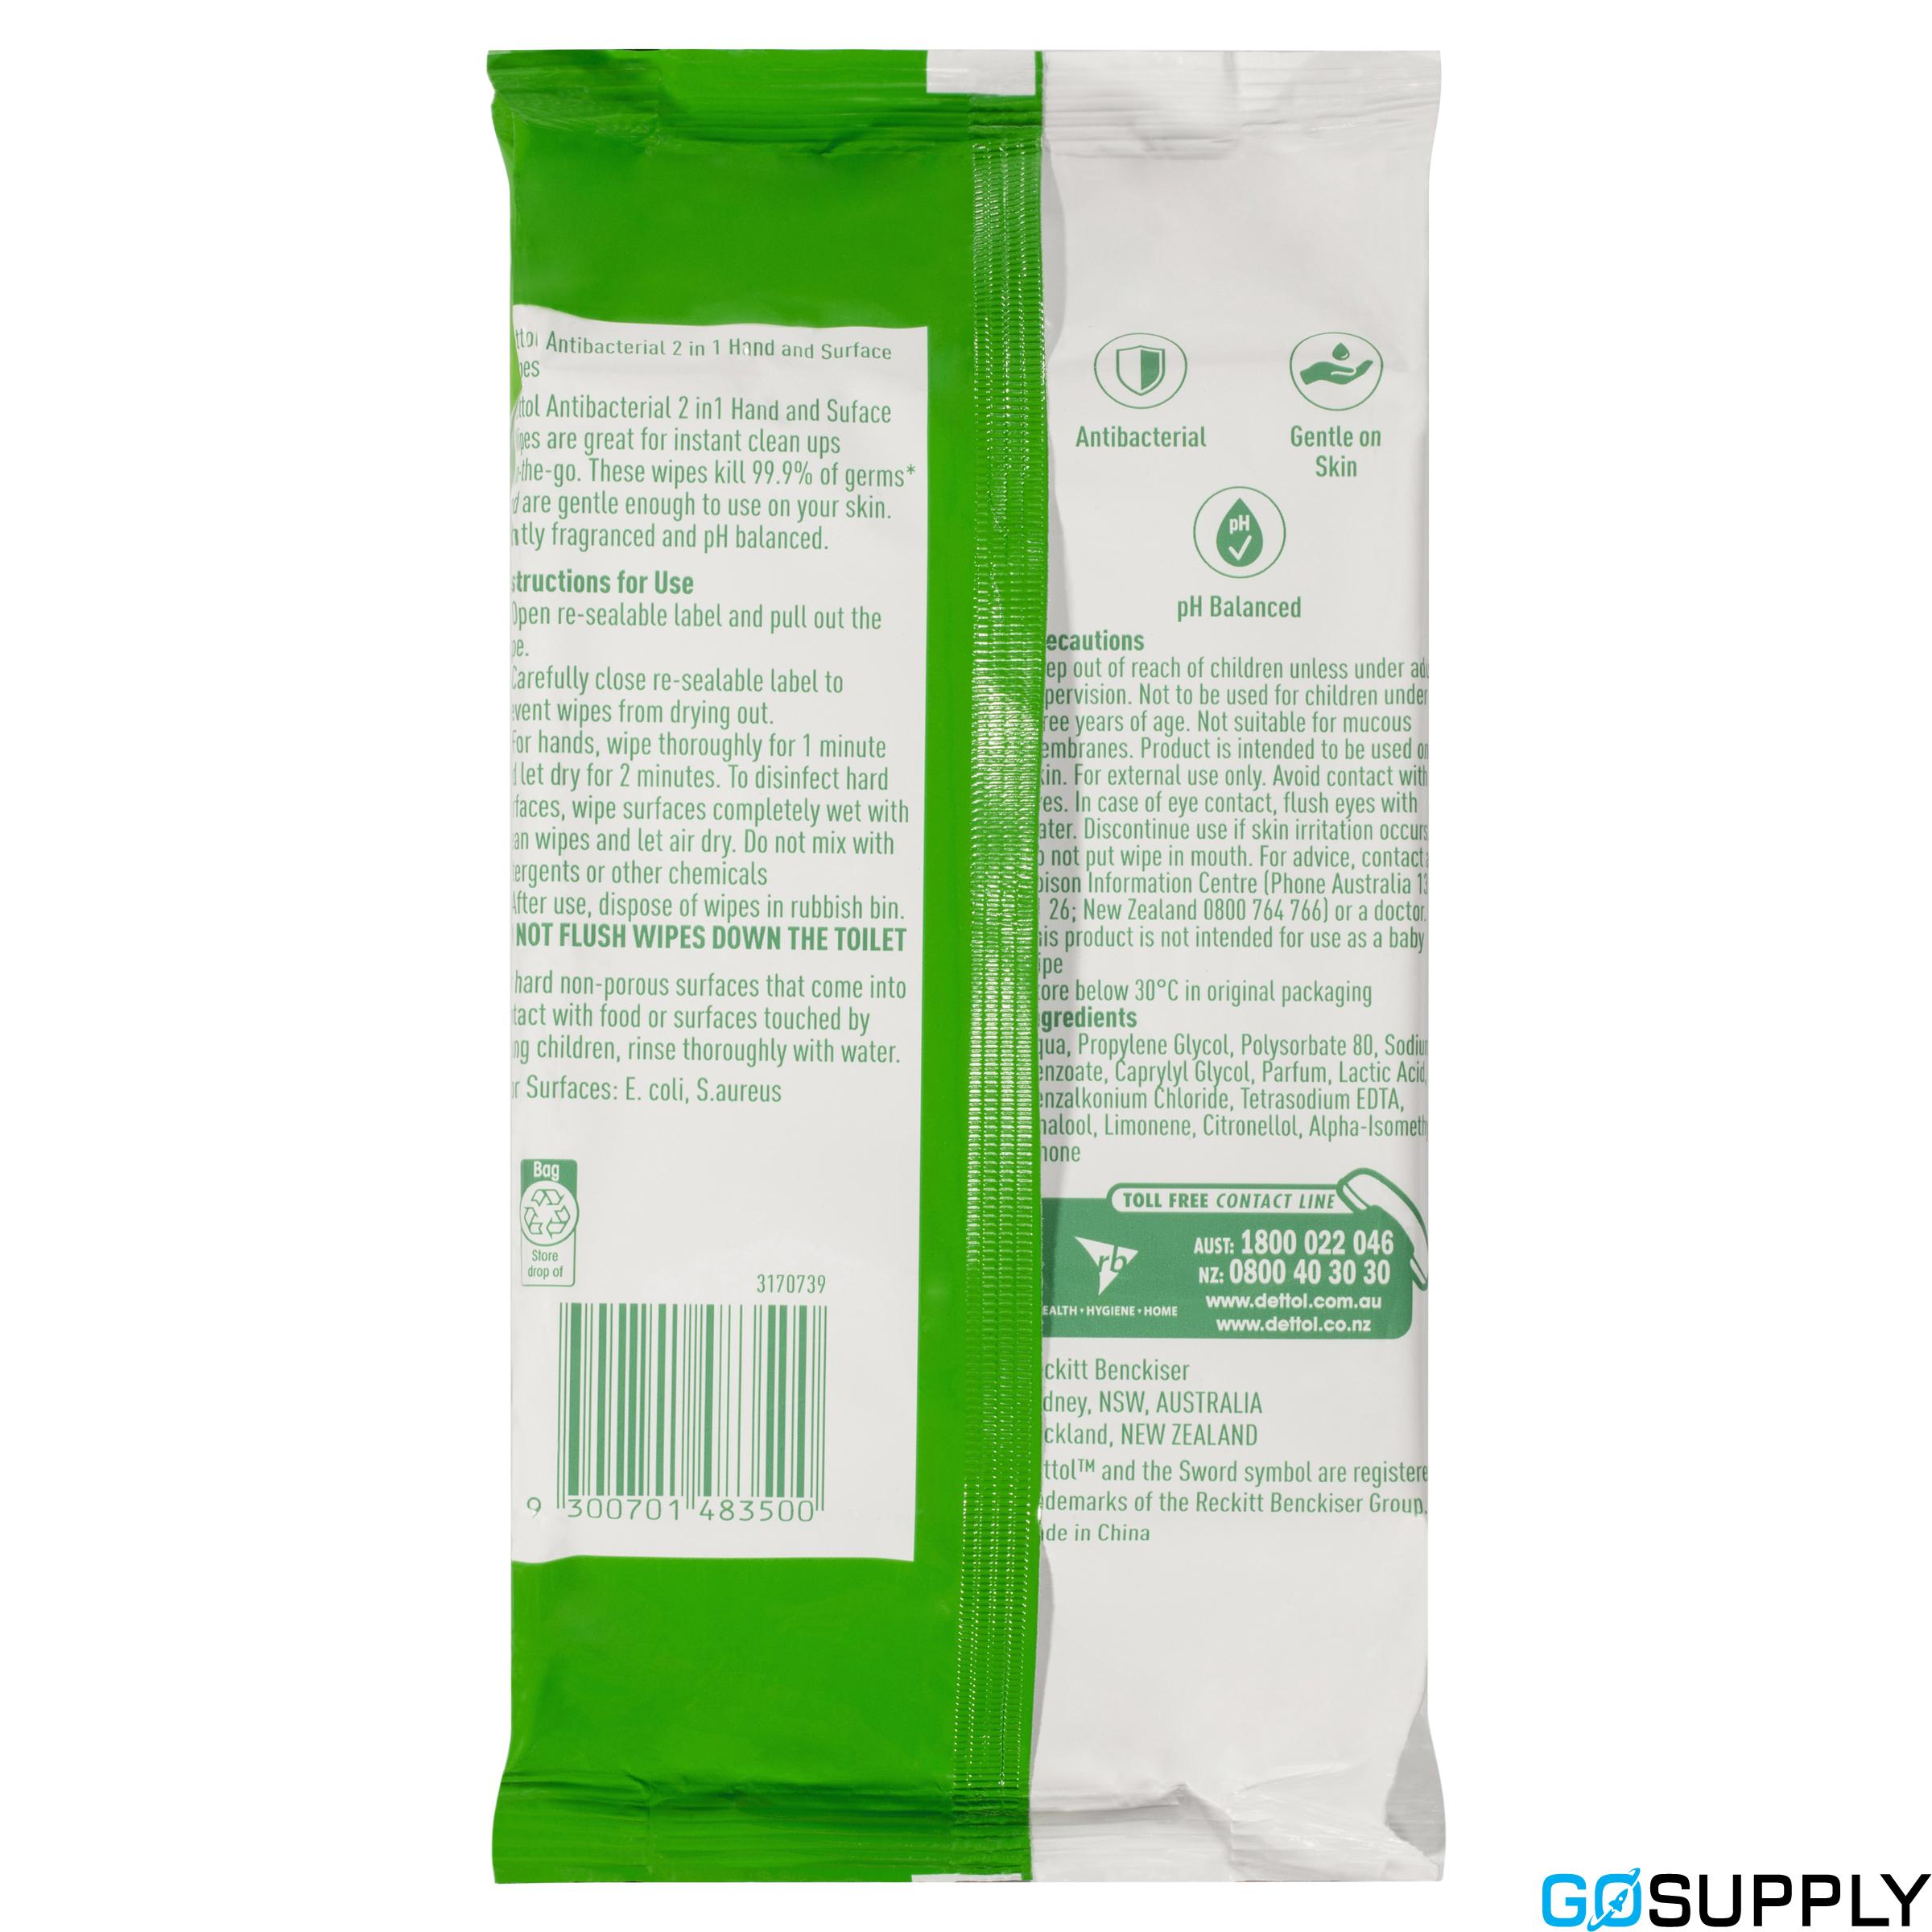 Dettol 2 in 1 Hands and Surfaces Antibacterial Wipes 60pk